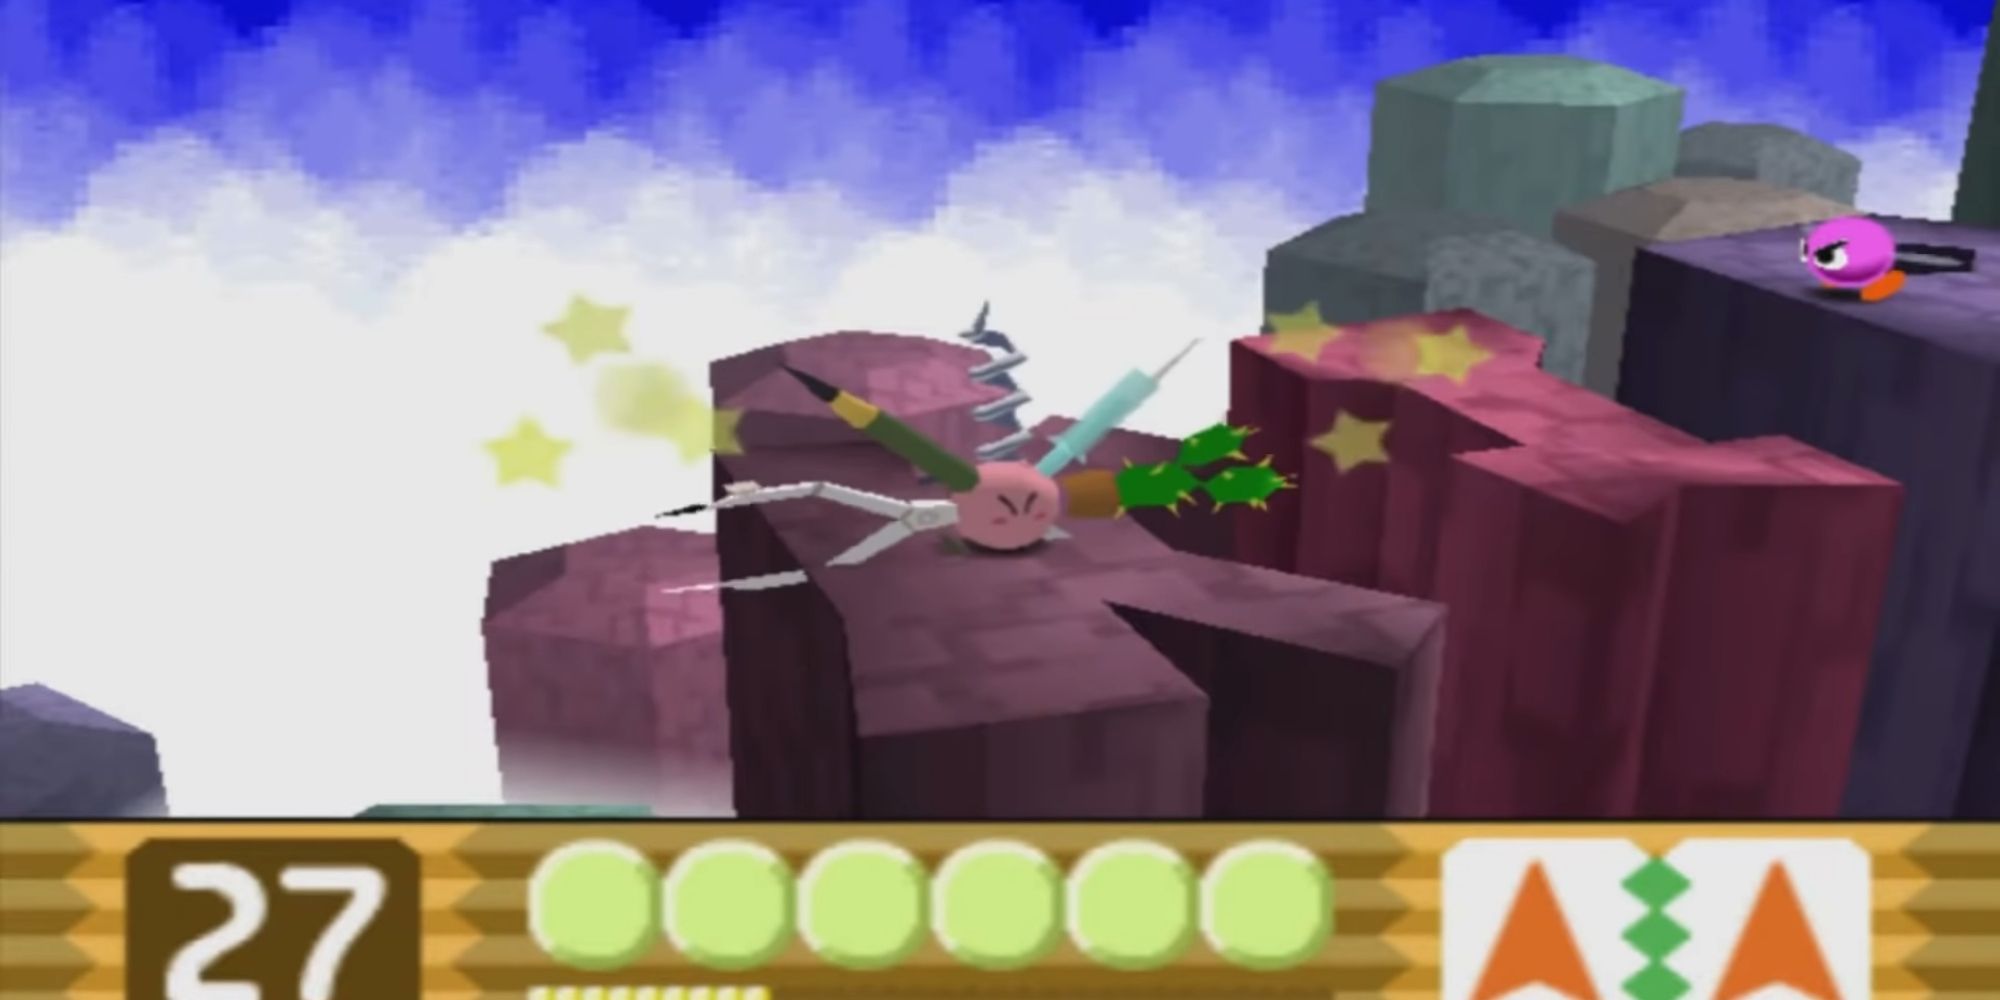 Swiss Army Kirby Pokes Enemies With His Sharp Objects On a Giant K